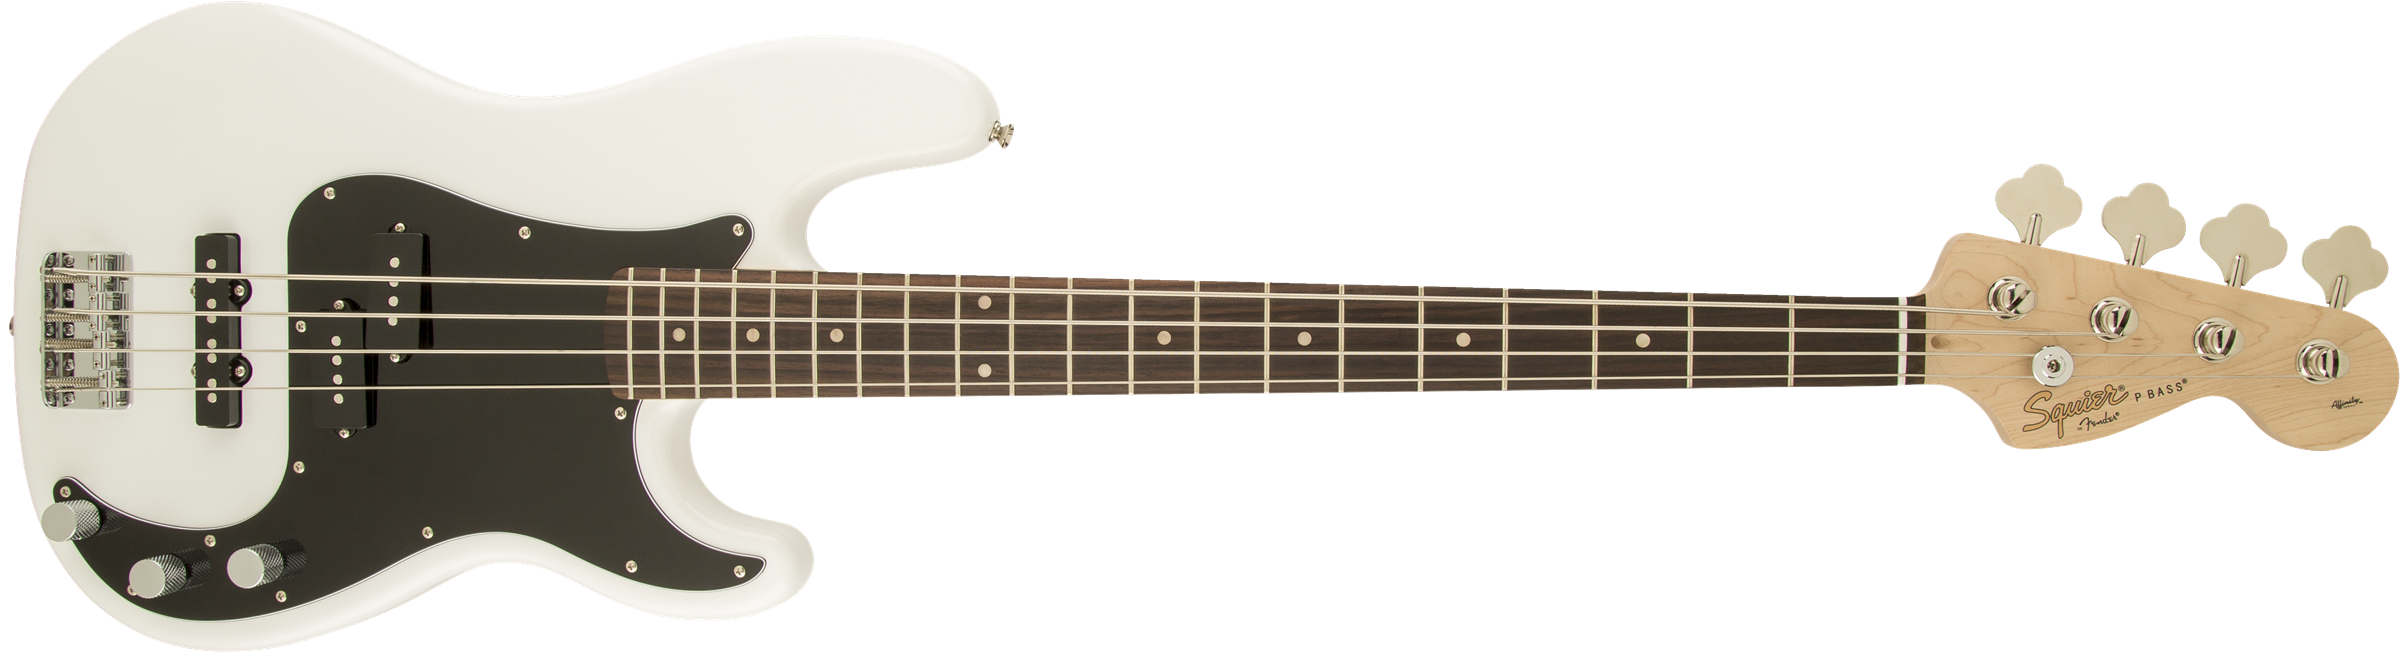 Squier Precision Bass Affinity Series Pj (lau) - Olympic White - Solidbody E-bass - Variation 1